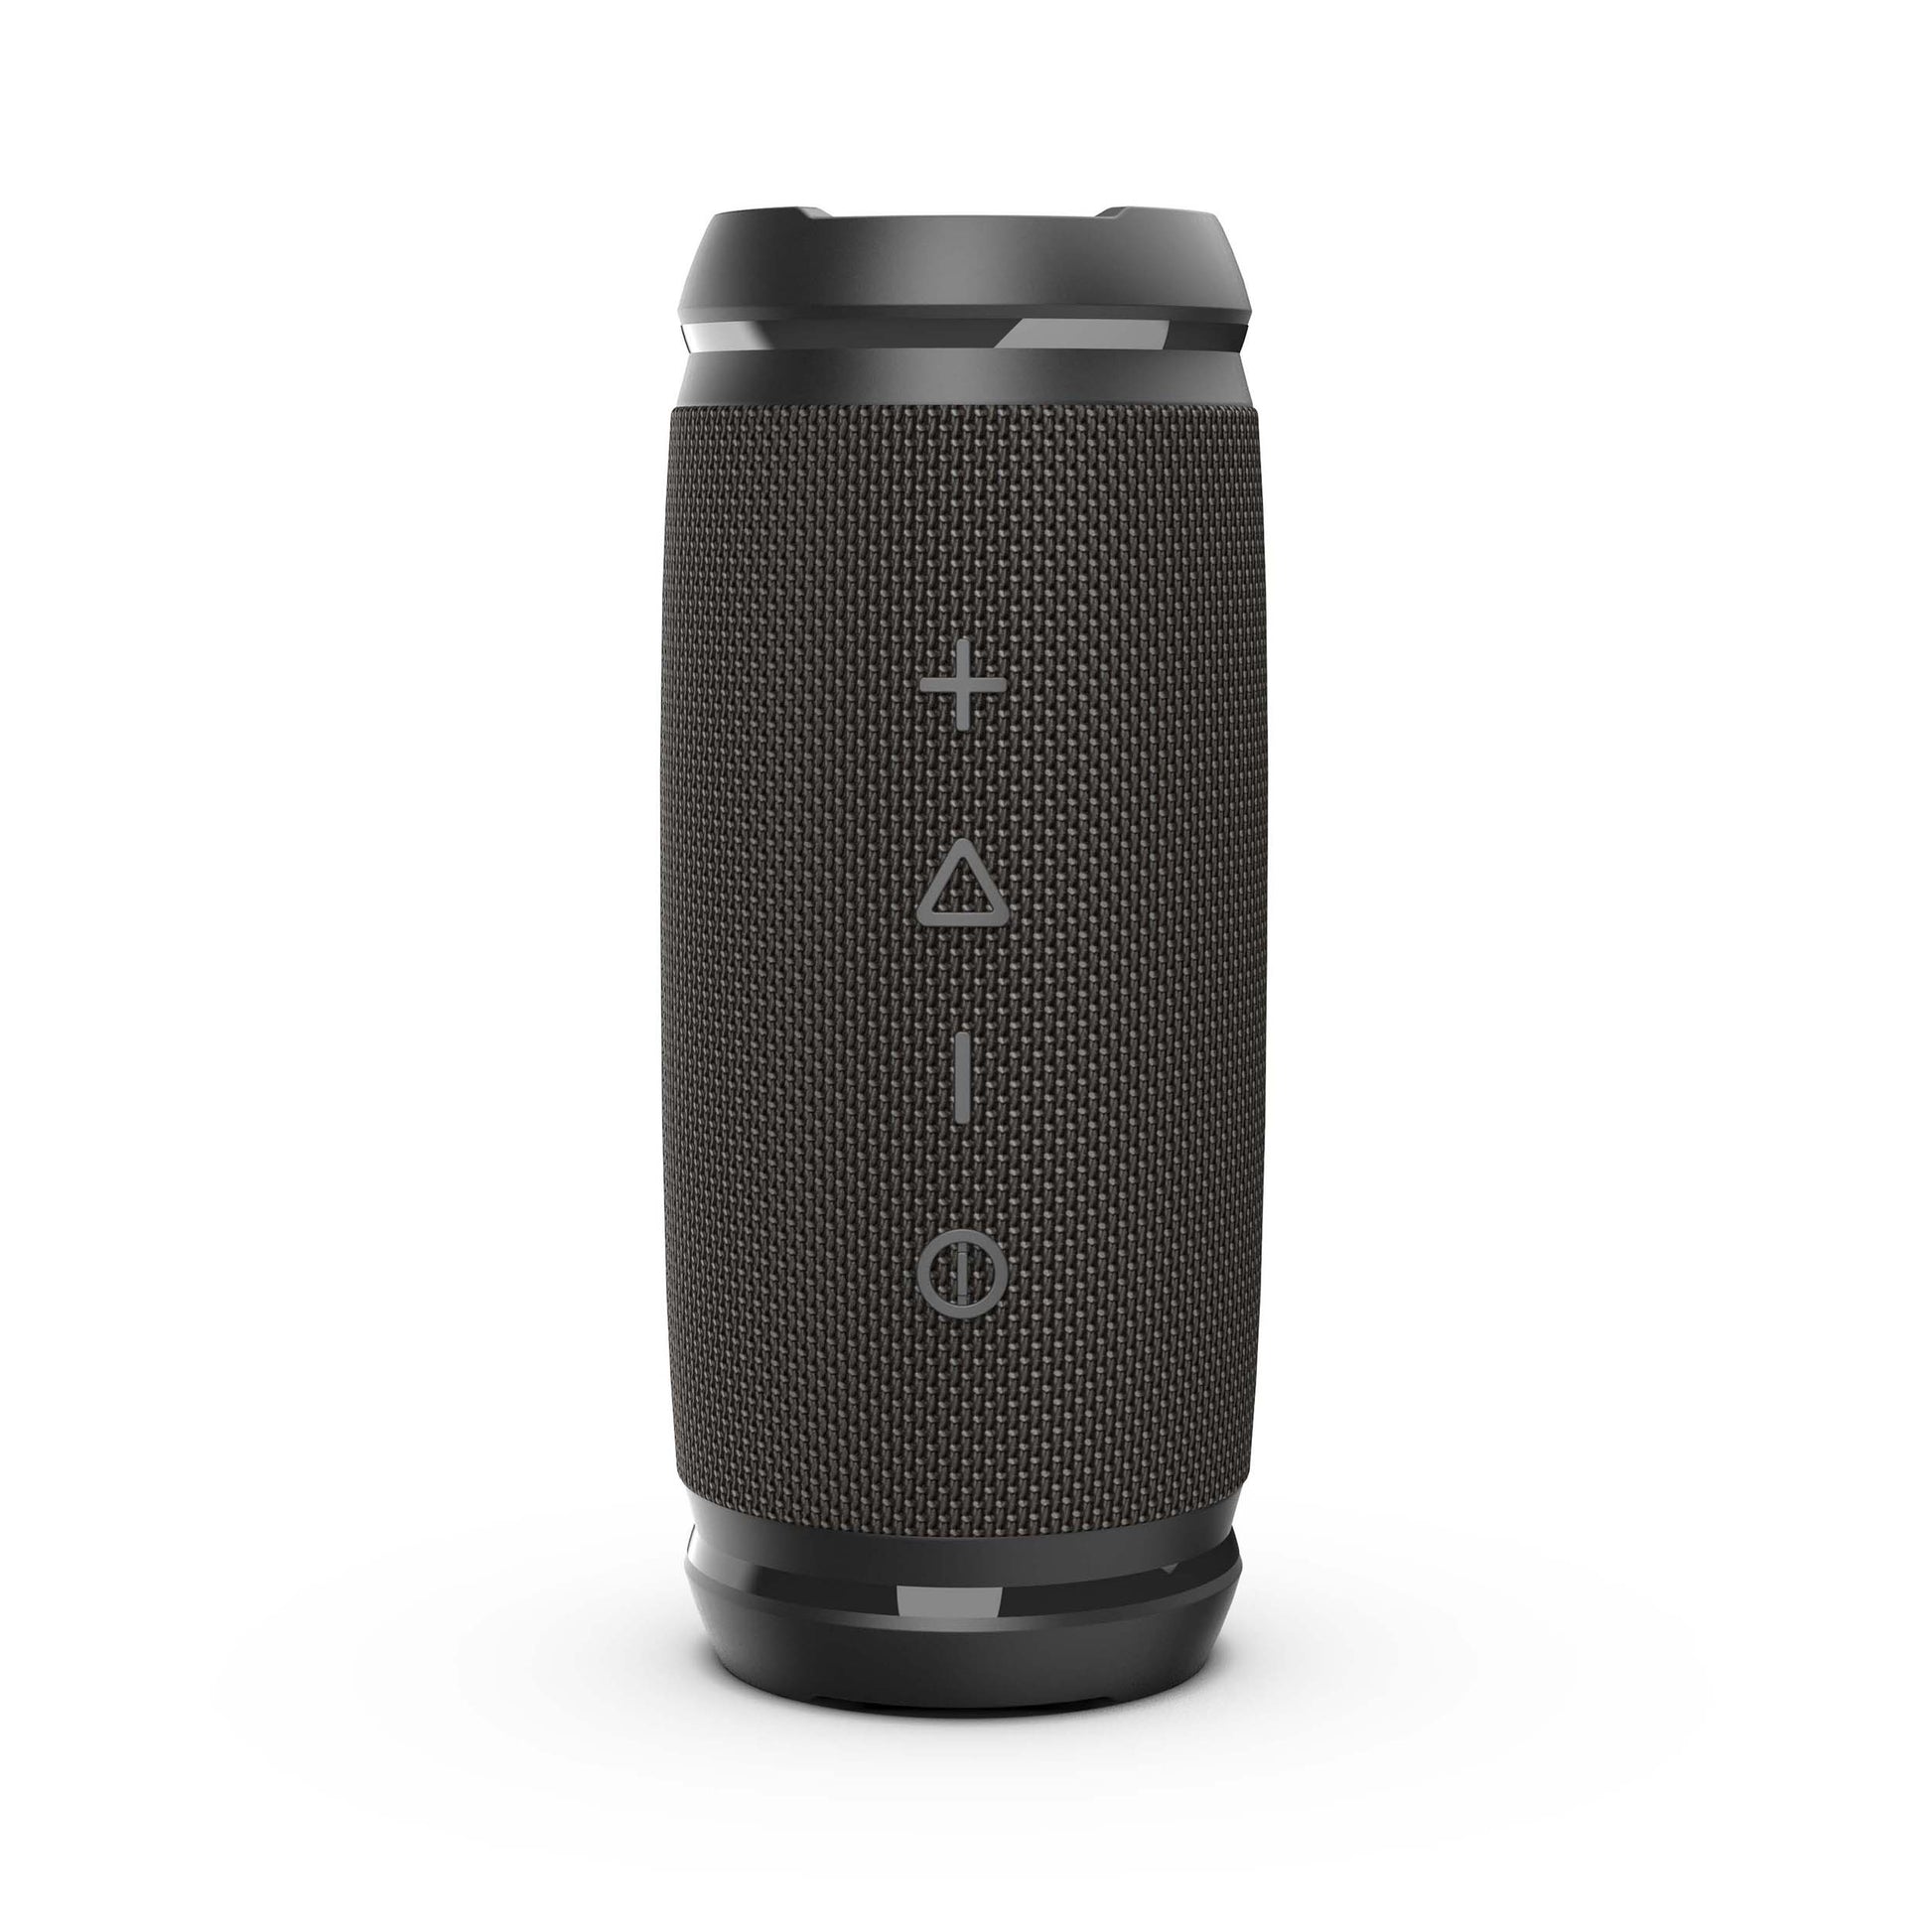 Vertical view of the Morpheus 360 Sound Stage Wireless Portable Bluetooth Speaker with the one touch media controls on the face of the speaker.